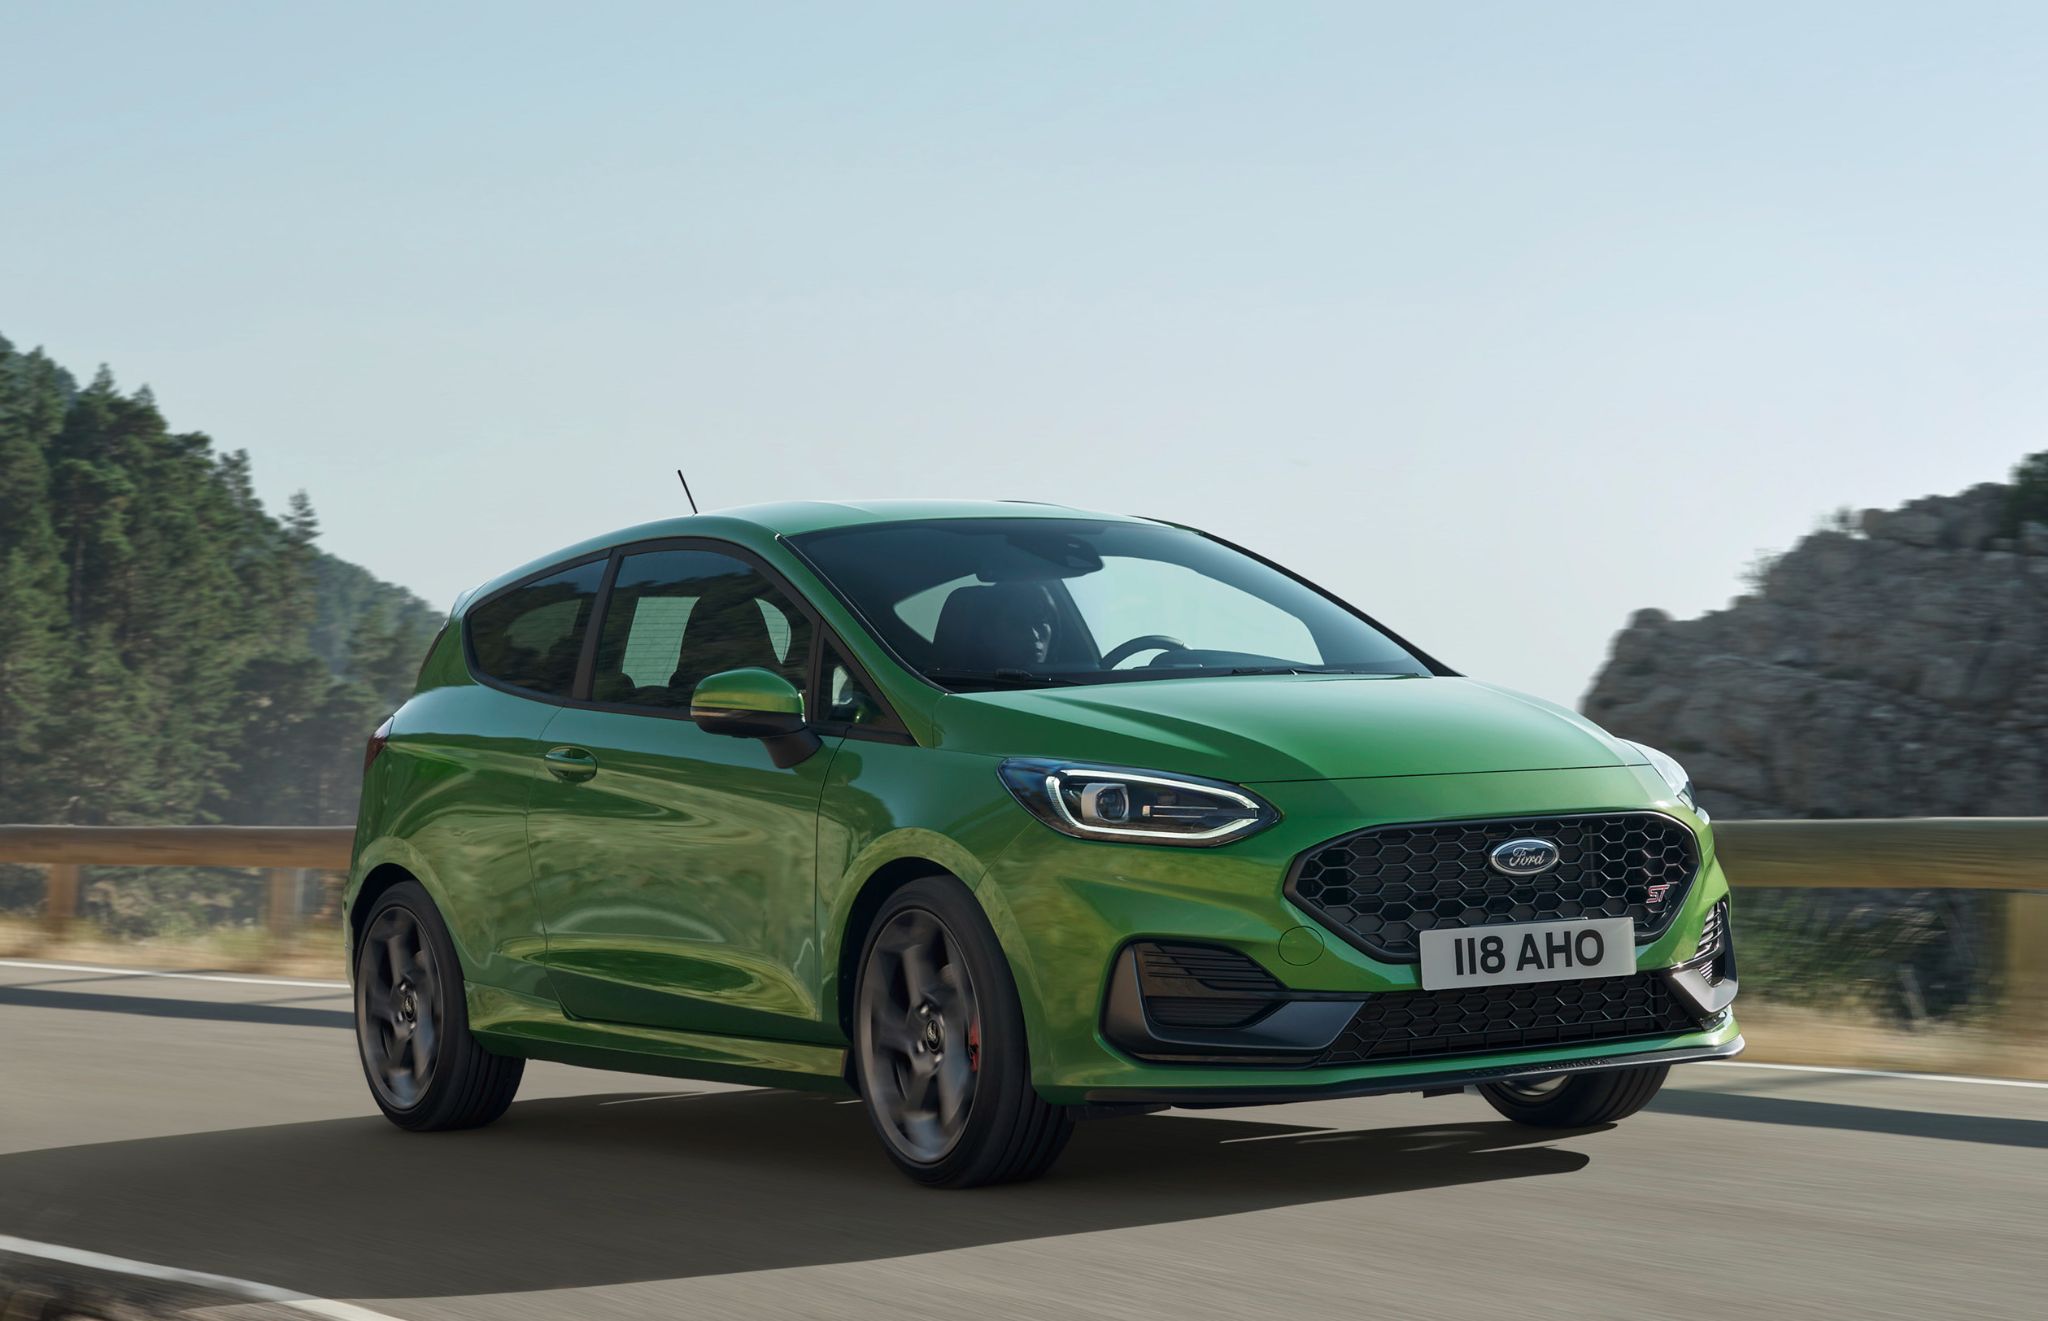 Production of the Ford Fiesta will be discontinued to make way for the large electric SUV